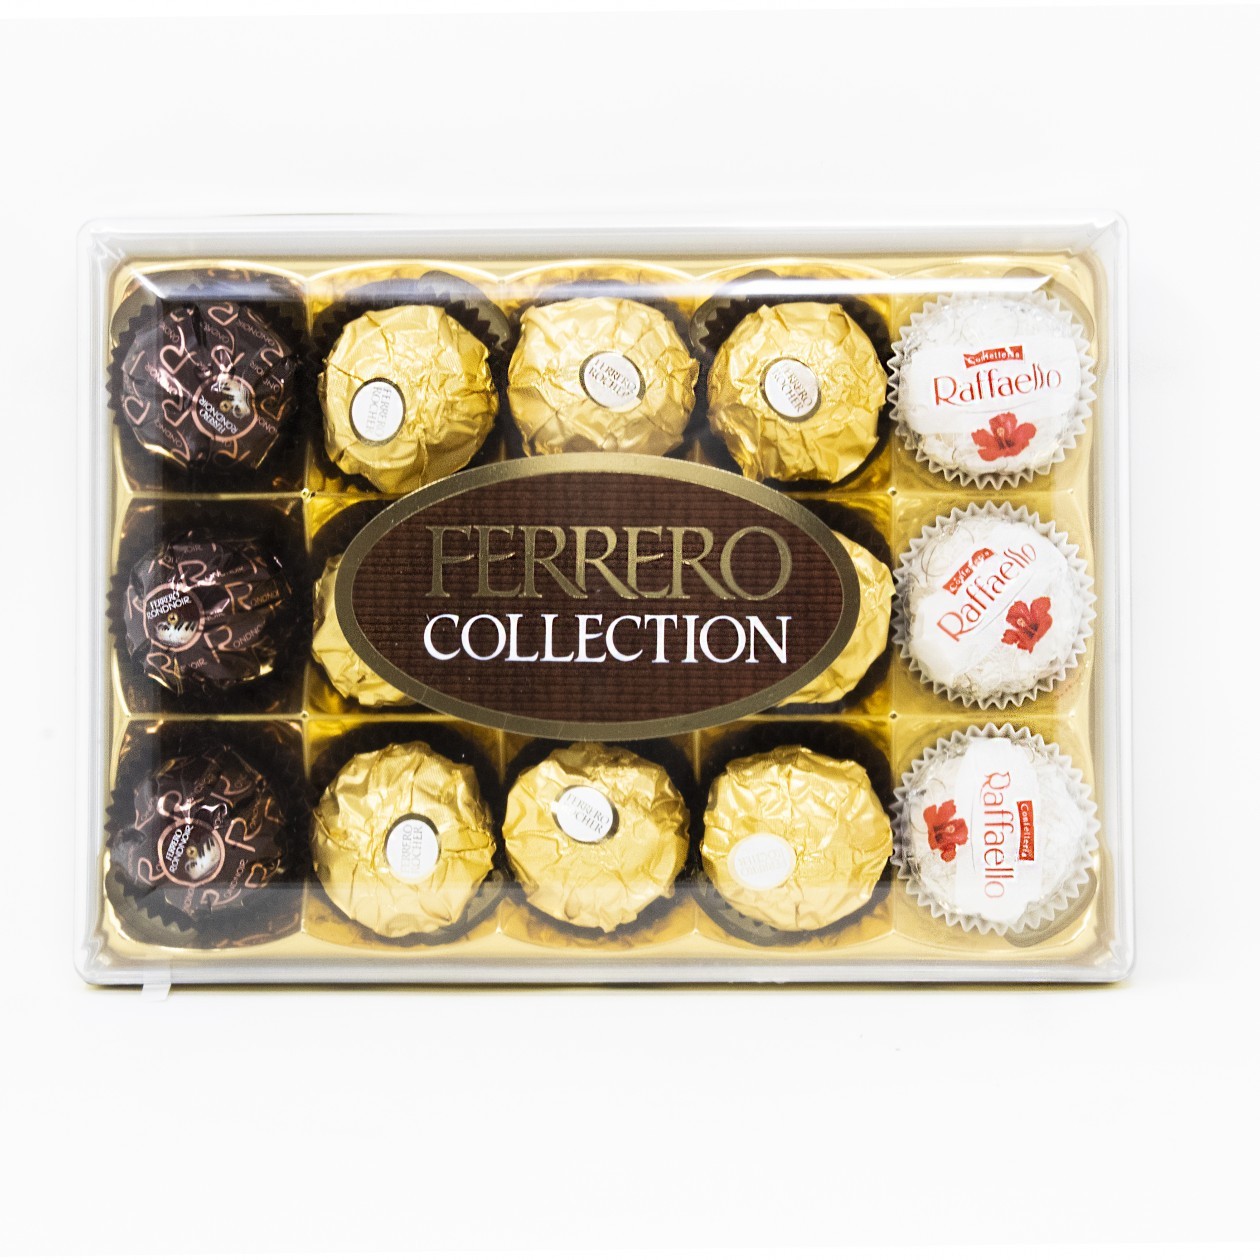 Ferrero Collection T15 172g / 15 Pieces